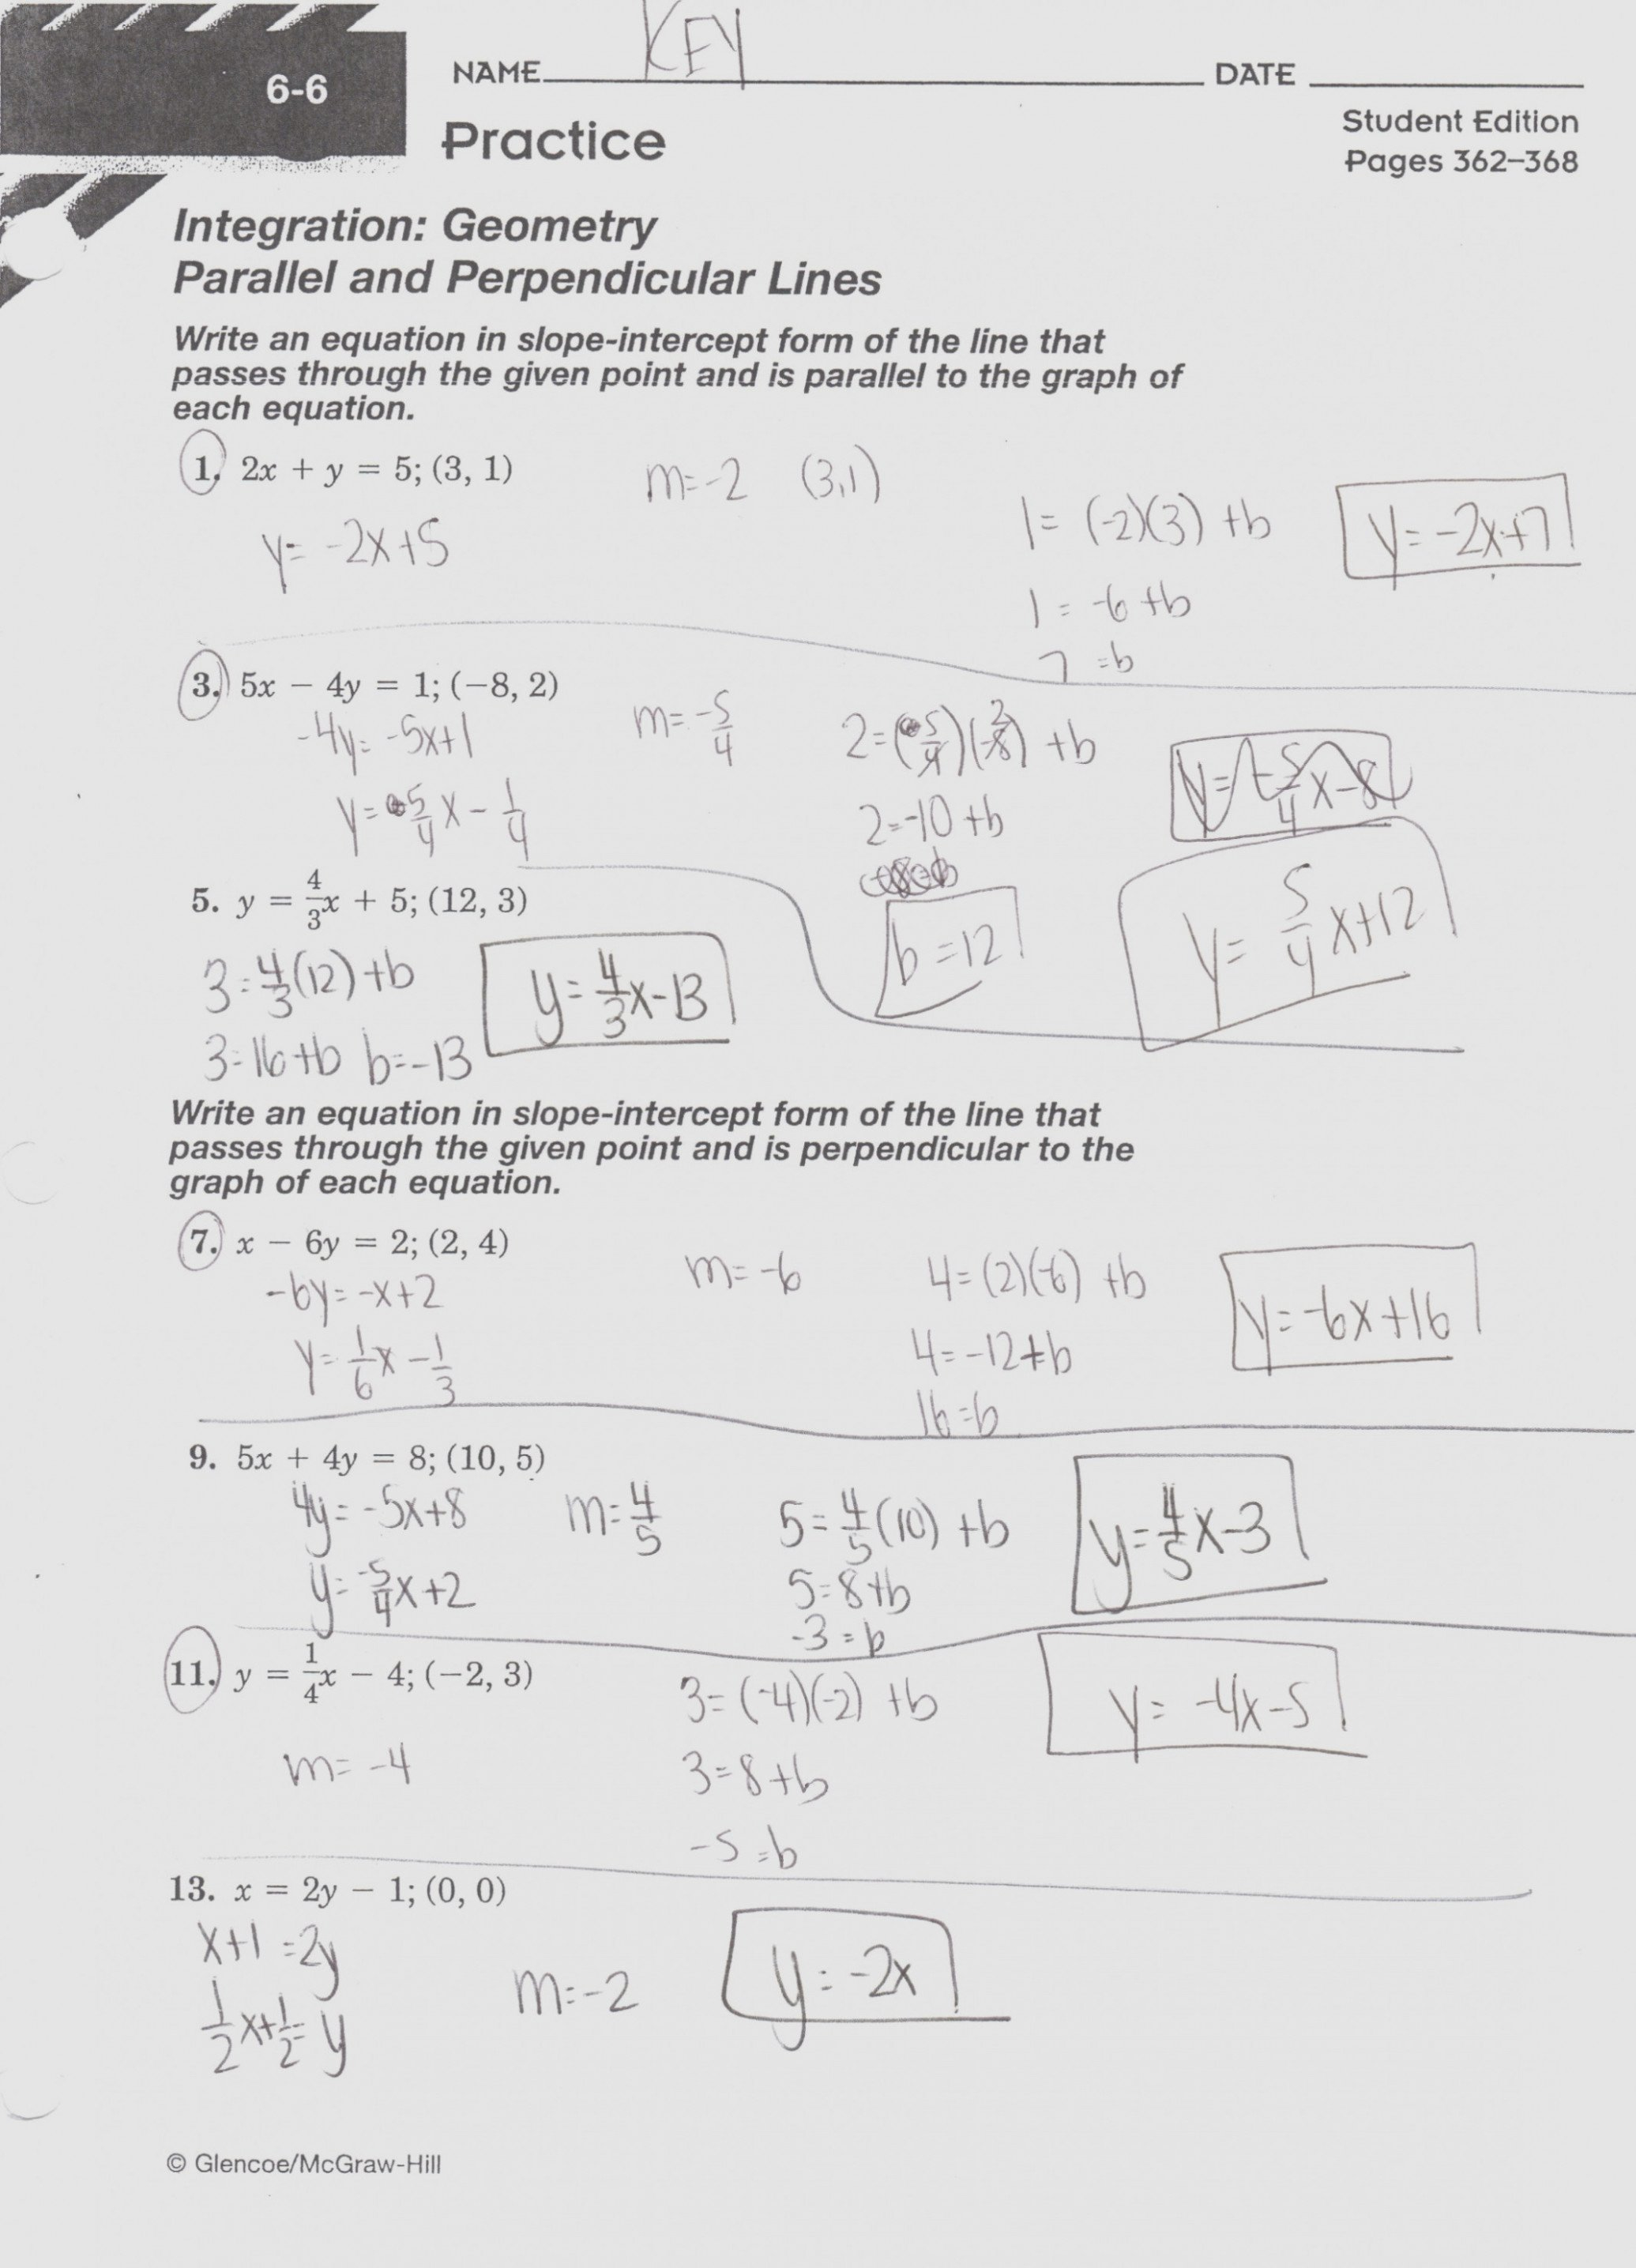 Writing Linear Equations Worksheet Answer Key – Breadandhearth – 12 For Writing Linear Equations Worksheet Answers